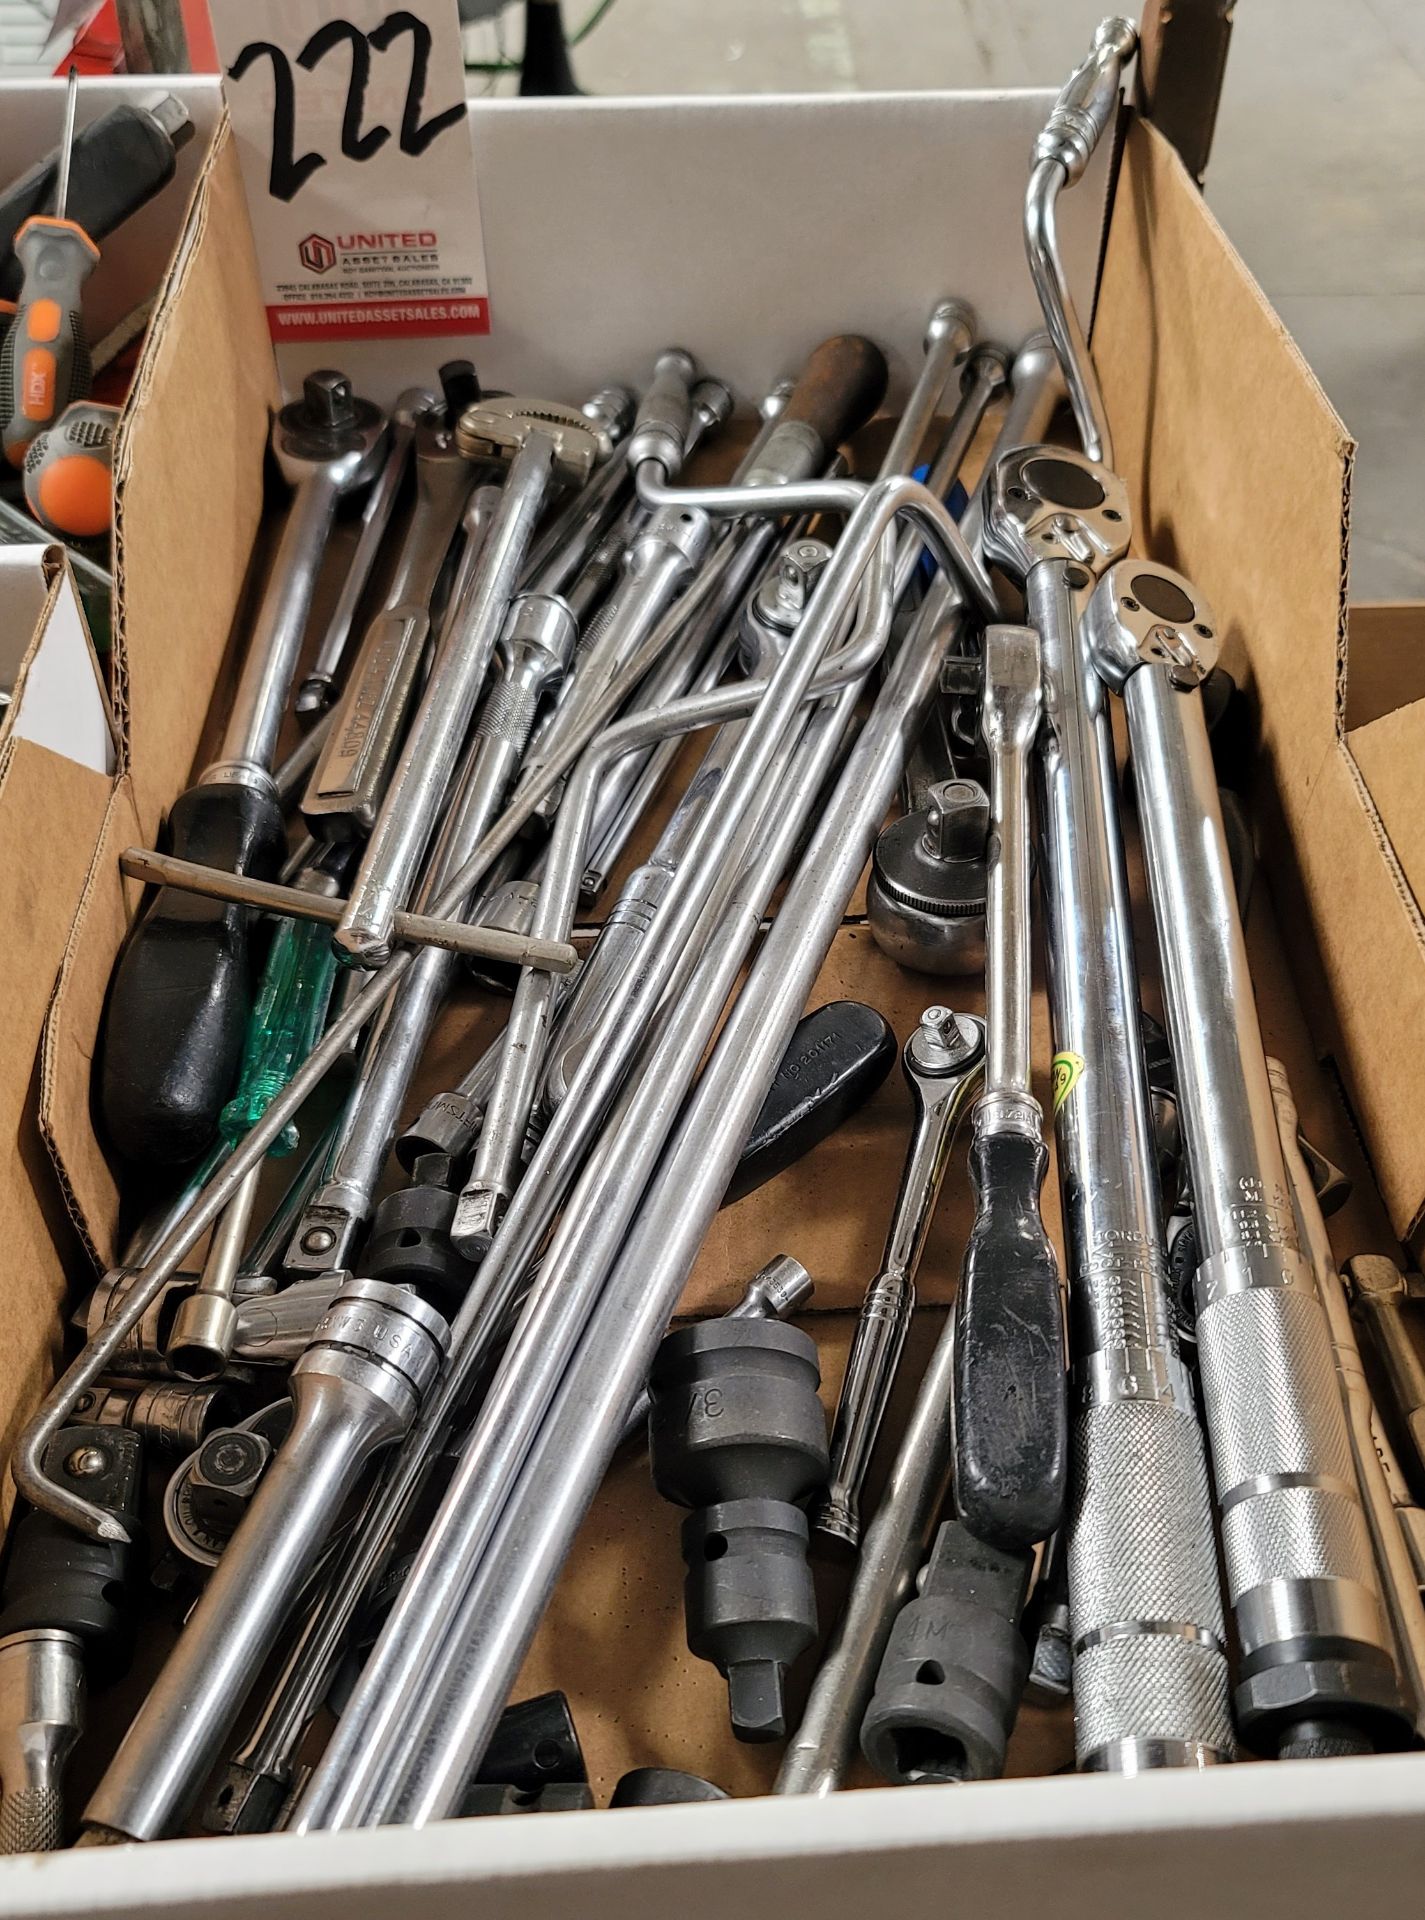 LOT - RATCHETS, BASIN WRENCH, EXTENSIONS, ETC.